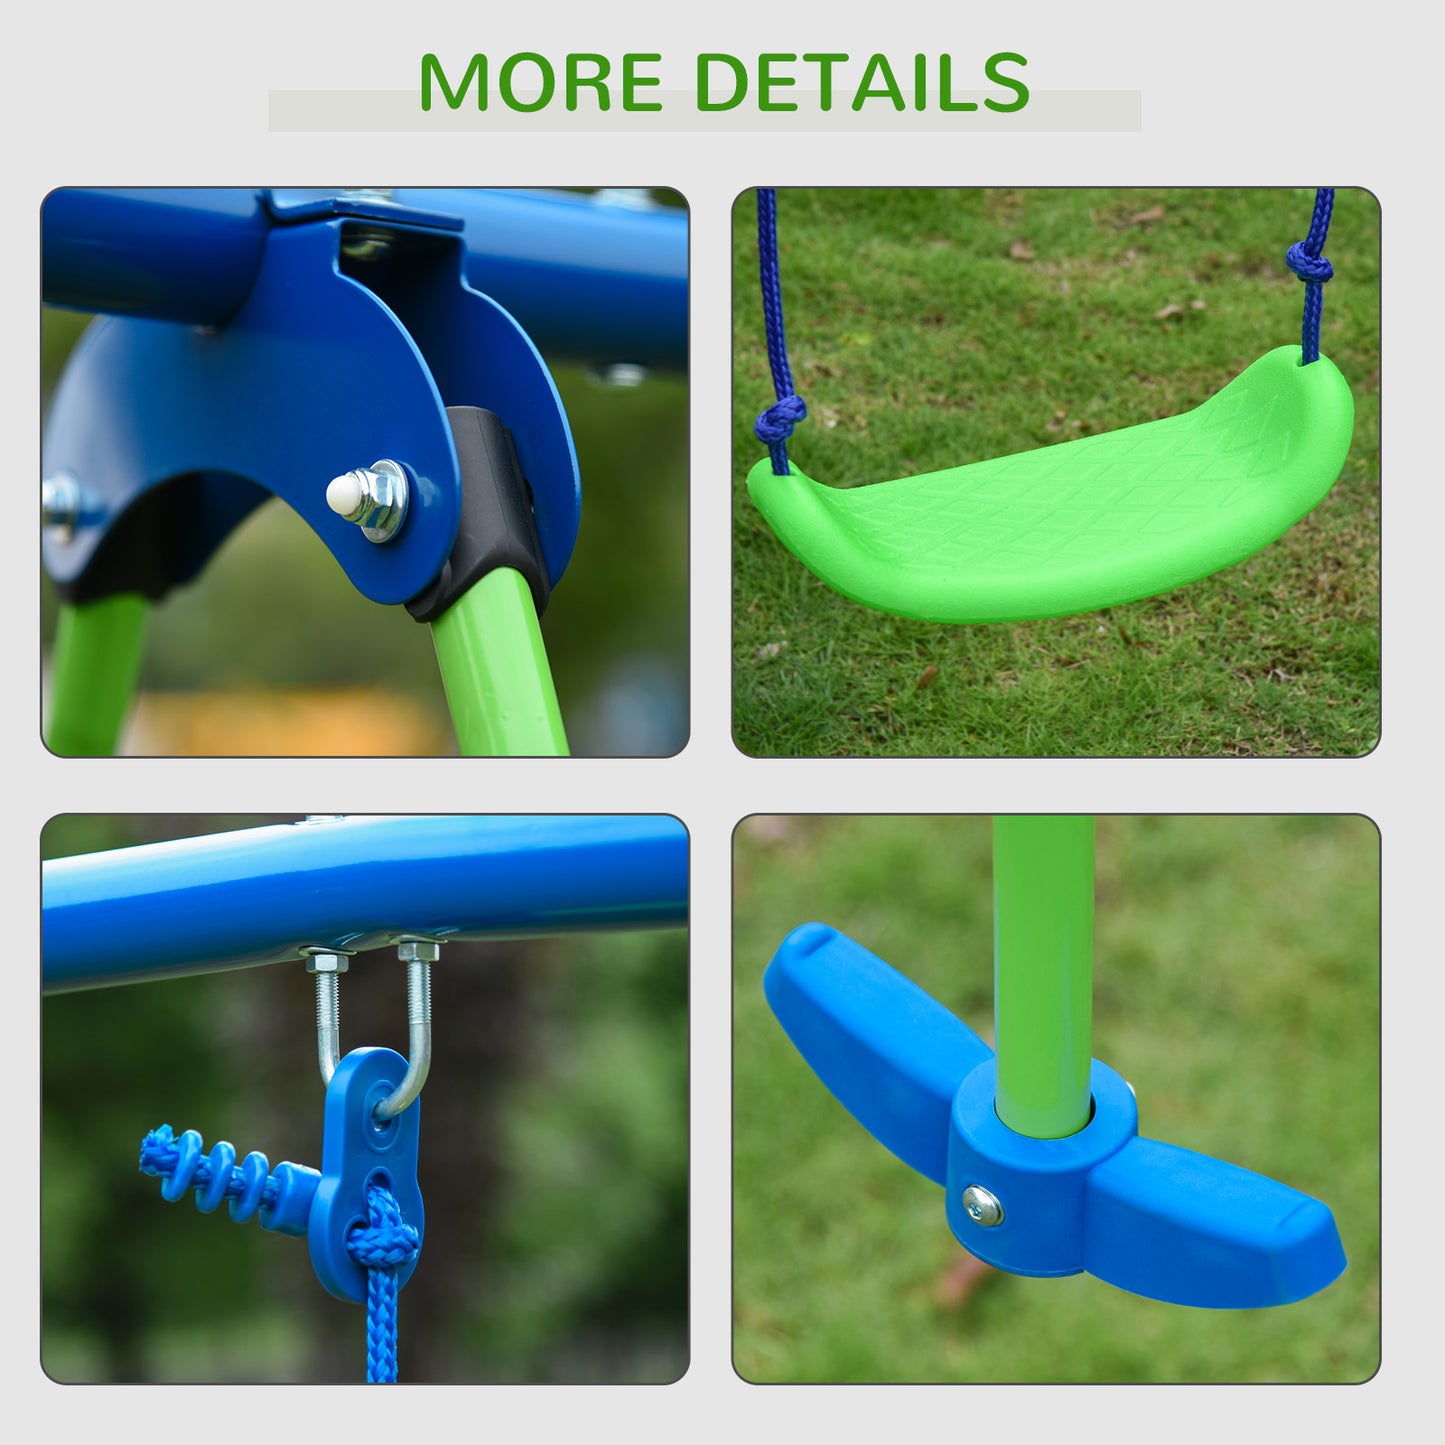 Outsunny Metal Swings & Seesaw Set Double Seats with a Height Adjustable Children Outdoor Backyard Play Set for Toddlers Over 3 Years Old, Green